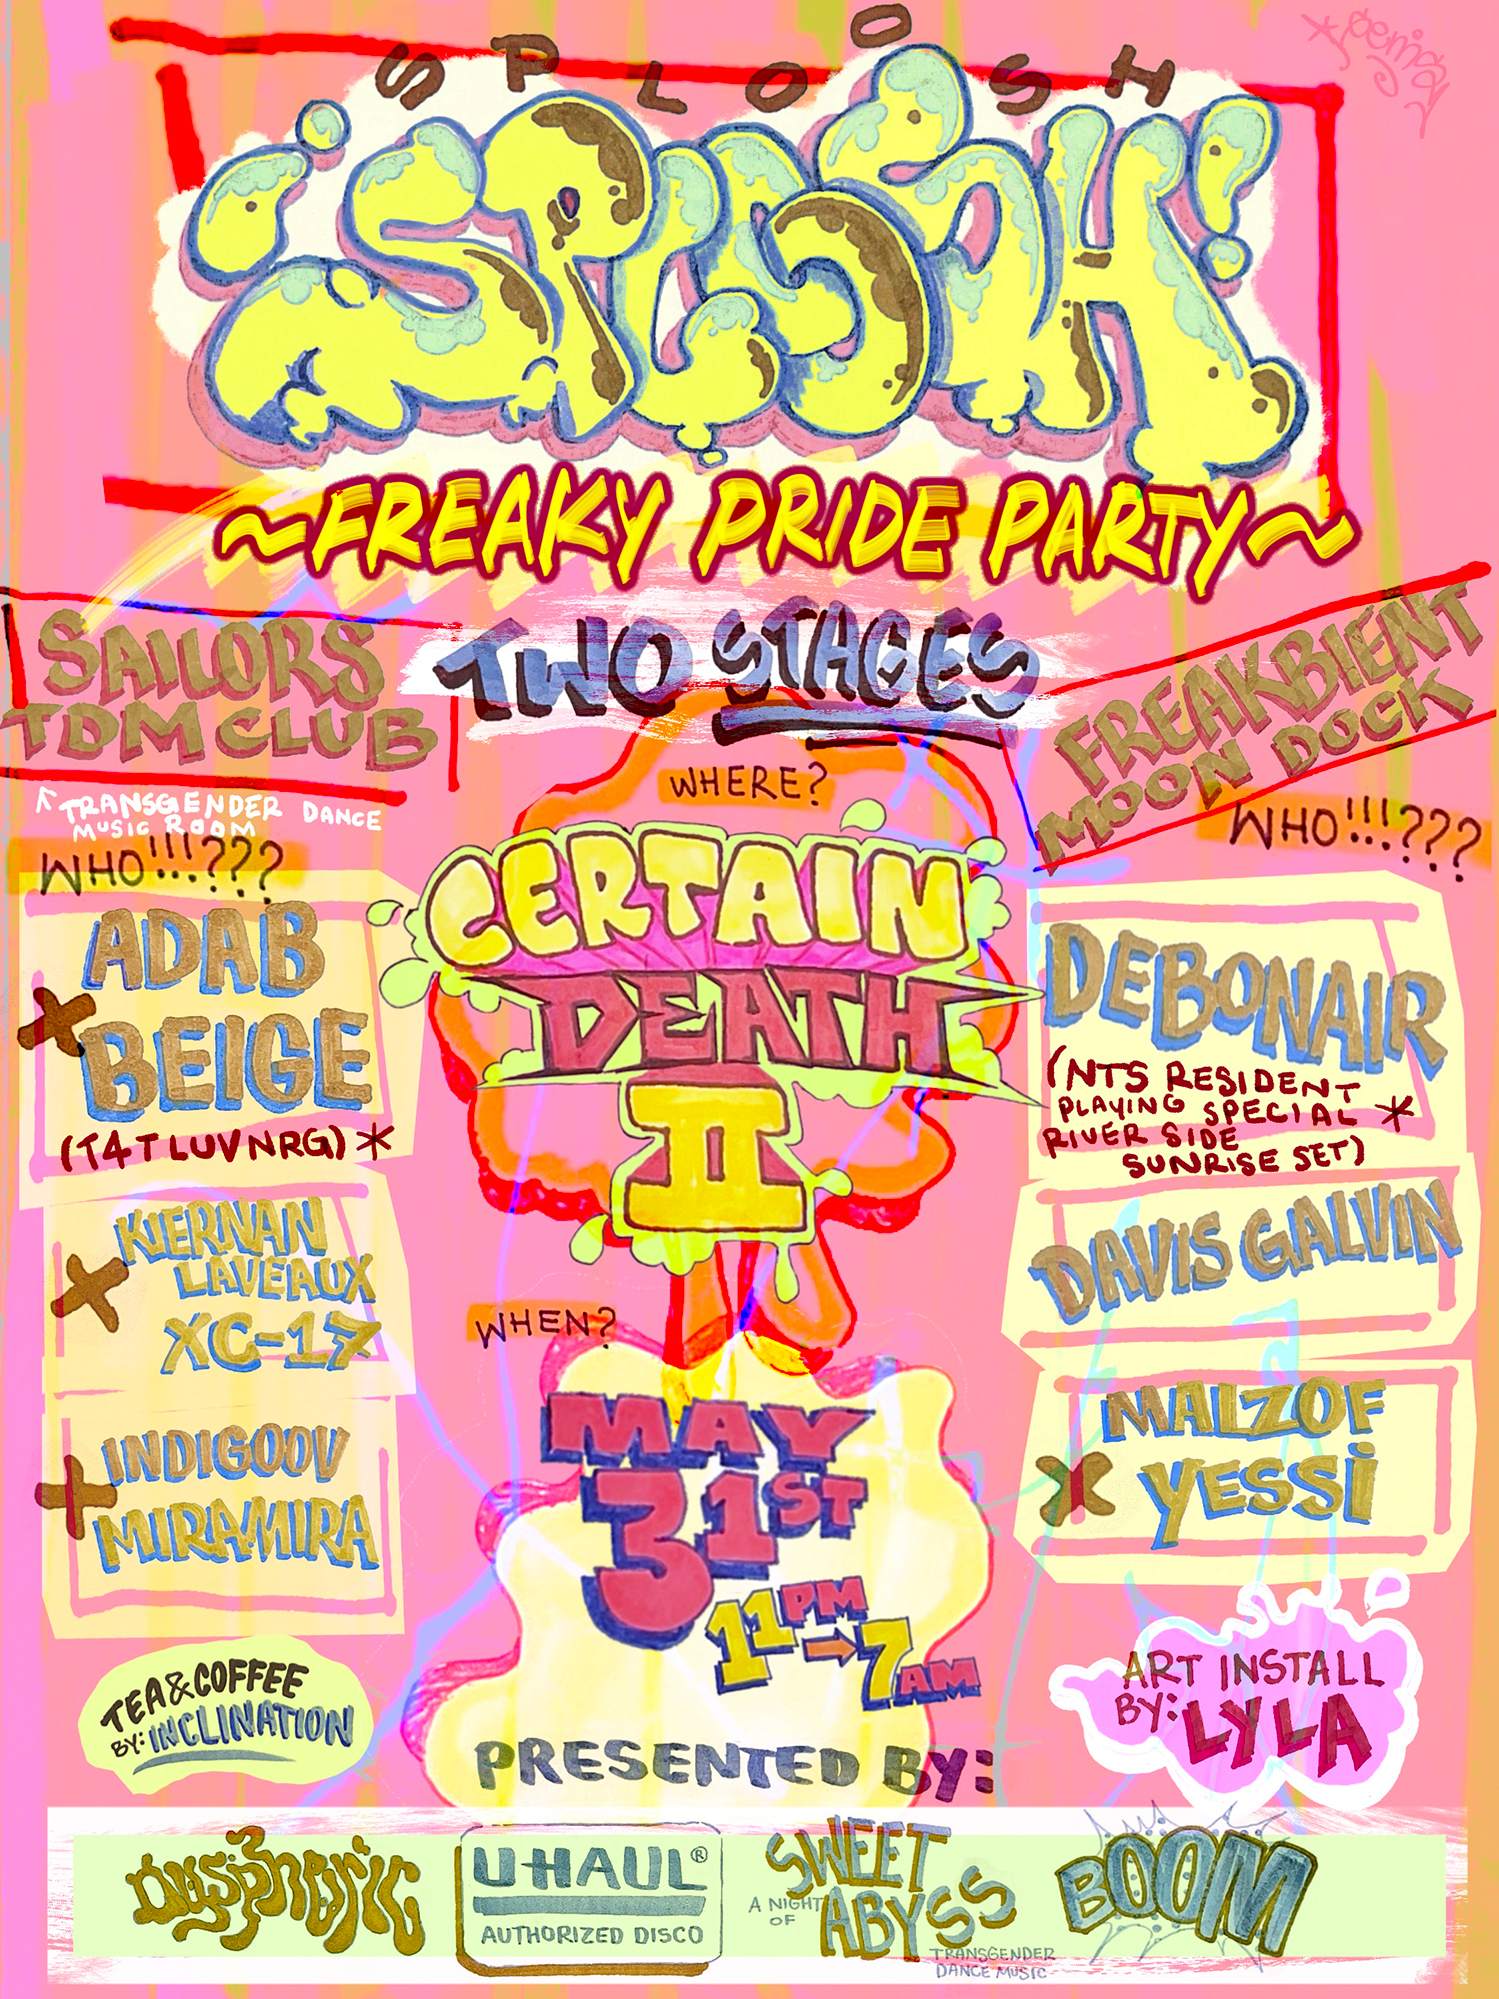 SPLOOSH! FREAKY PRIDE PARTY presented by Dyspheric x Sweet Abyss x Uhaul Disco - Página frontal